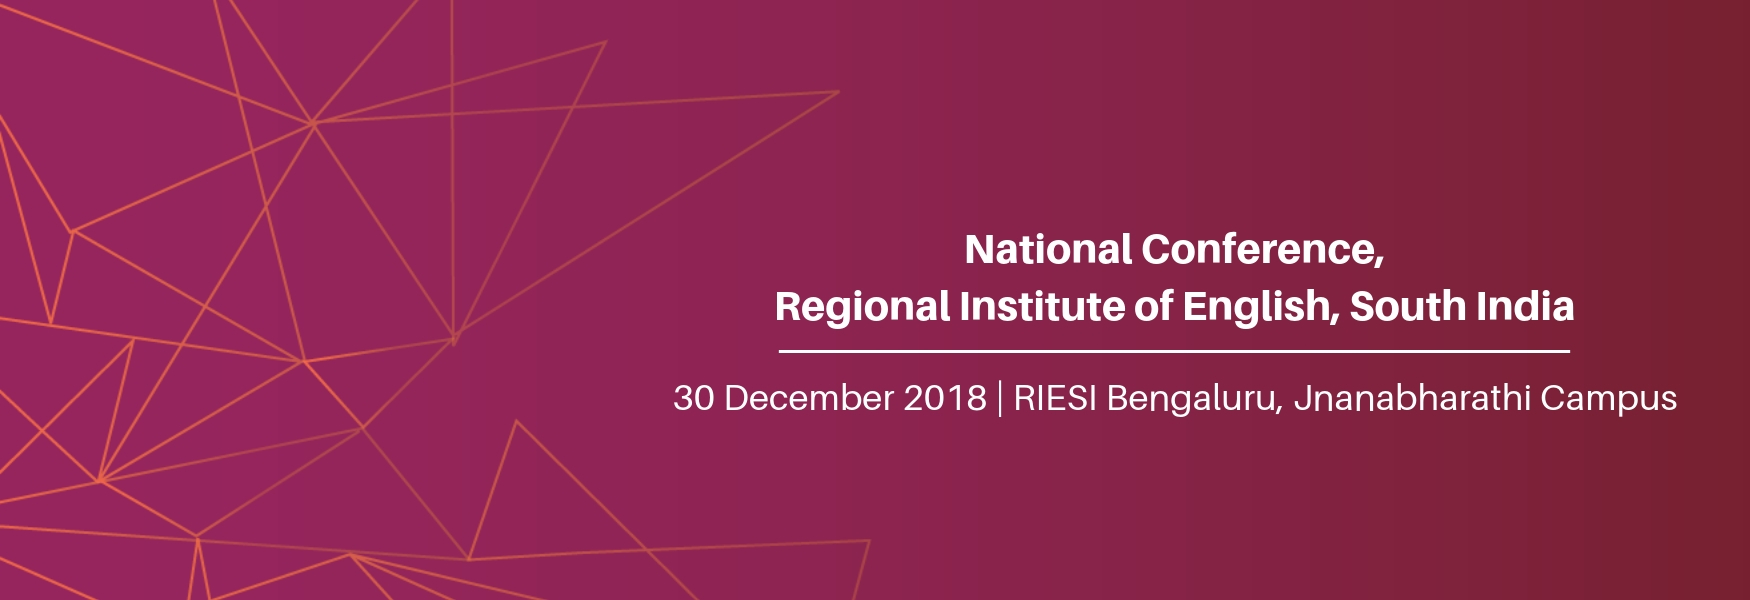 National Conference at RIESI